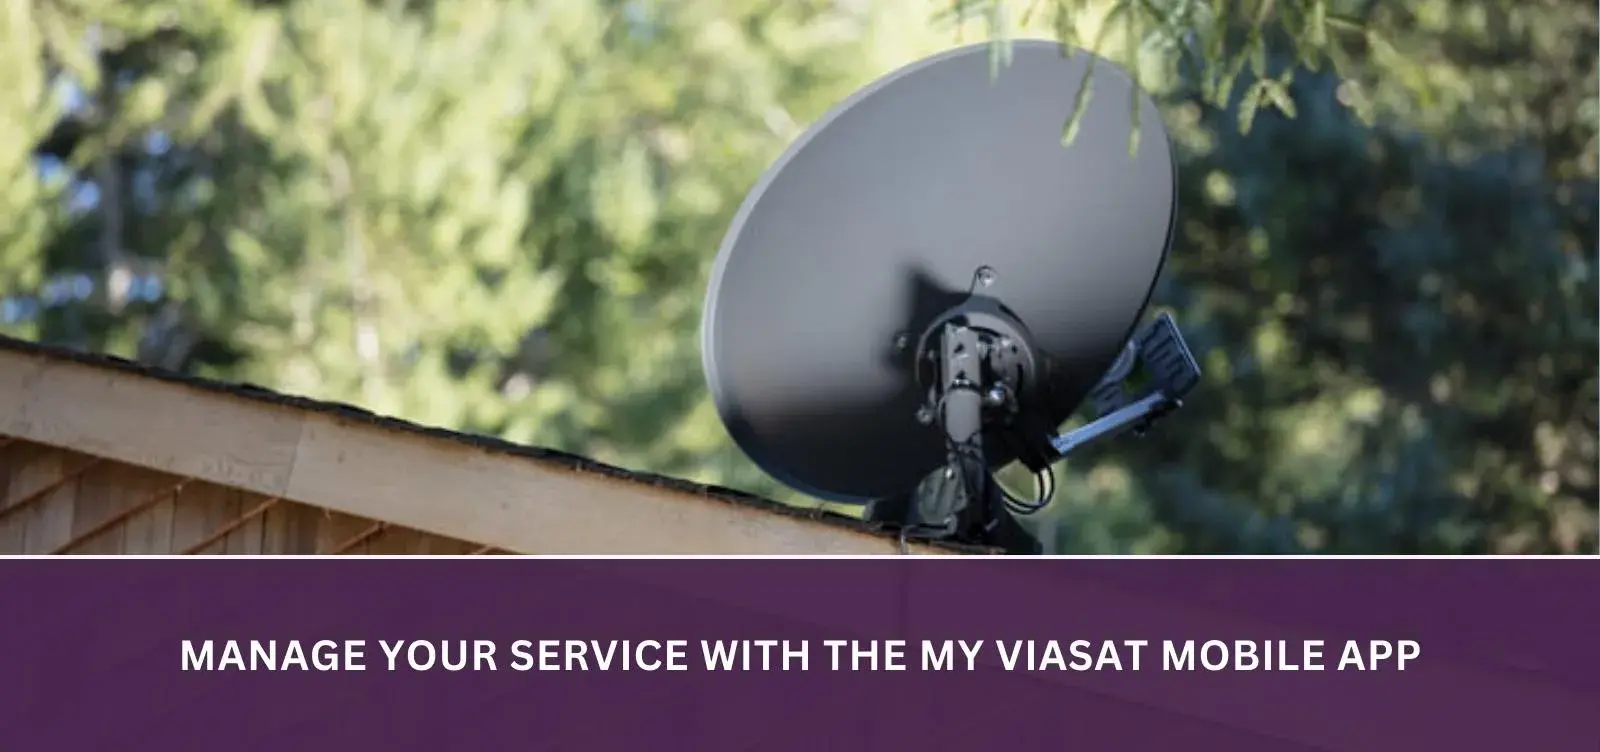 Manage your service with the My Viasat mobile app